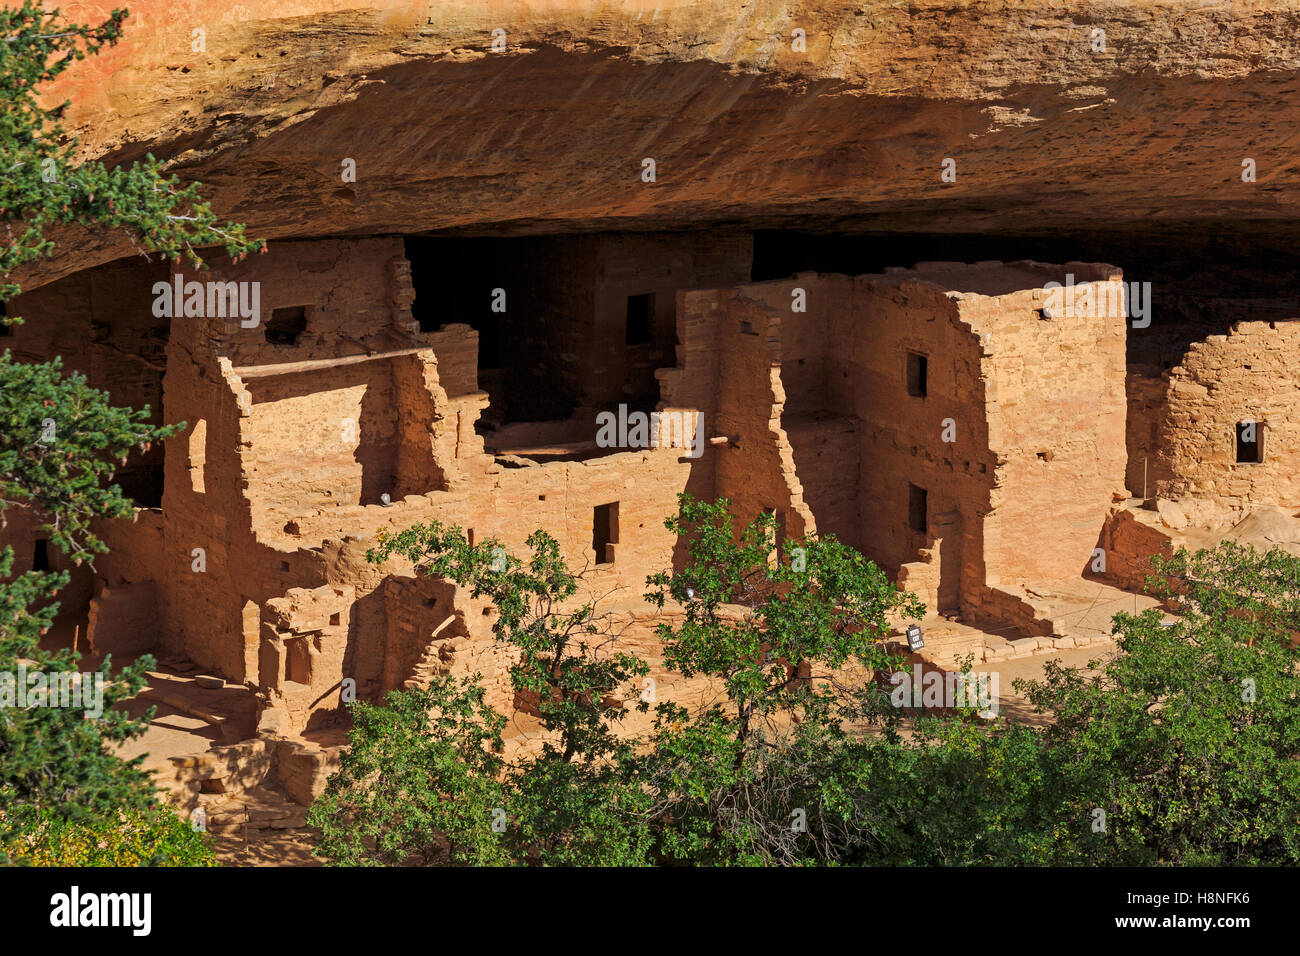 A view of the Spruce Tree House, the third largest and best preserved cliff dwelling in Mesa Verde National Park Colorado USA Stock Photo